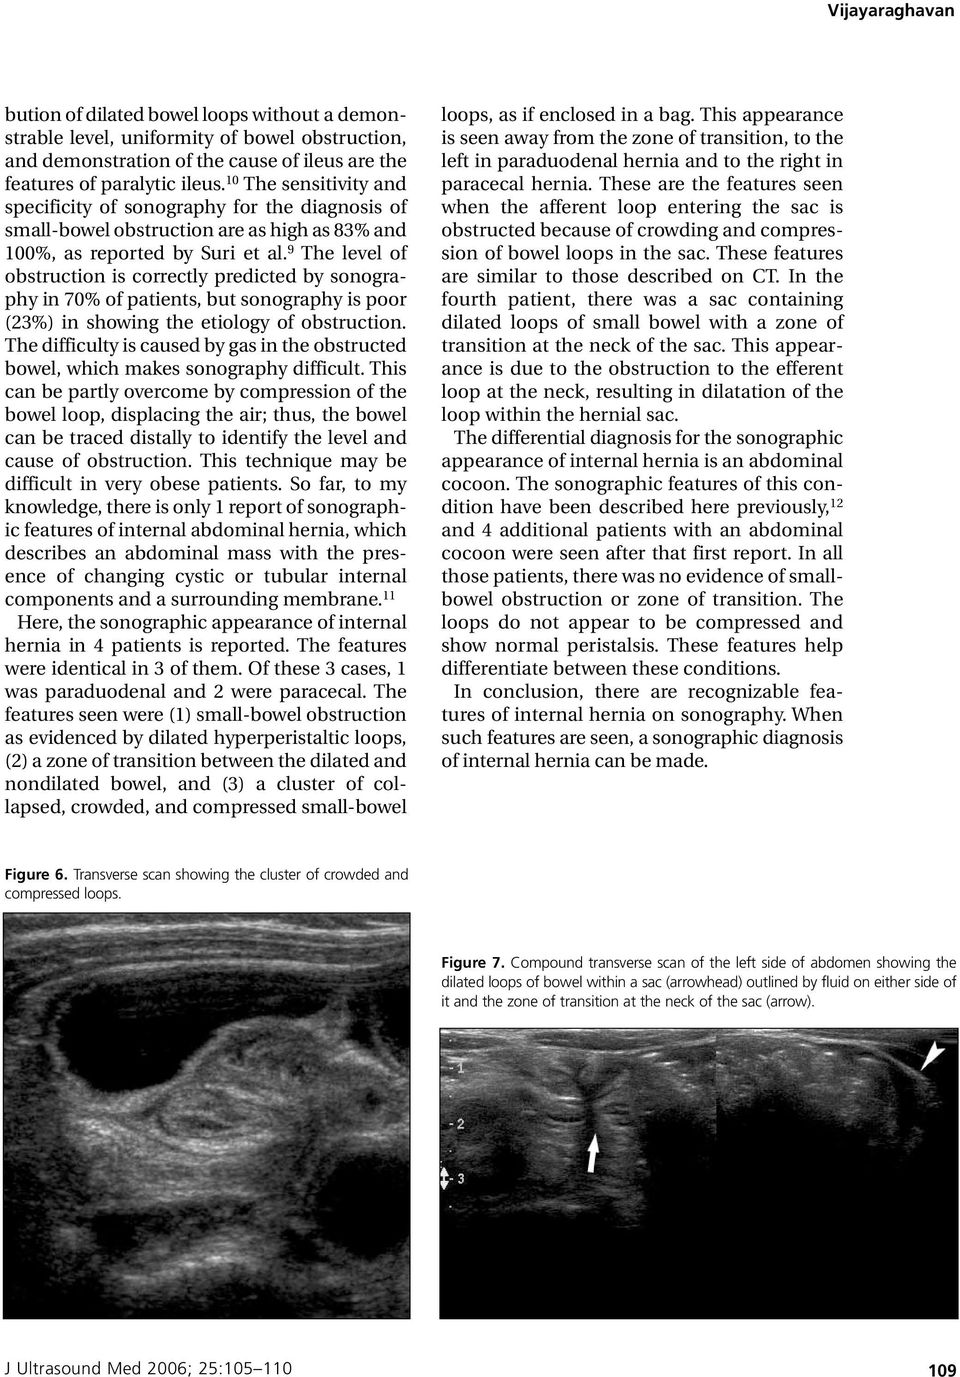 9 The level of obstruction is correctly predicted by sonography in 70% of patients, but sonography is poor (23%) in showing the etiology of obstruction.